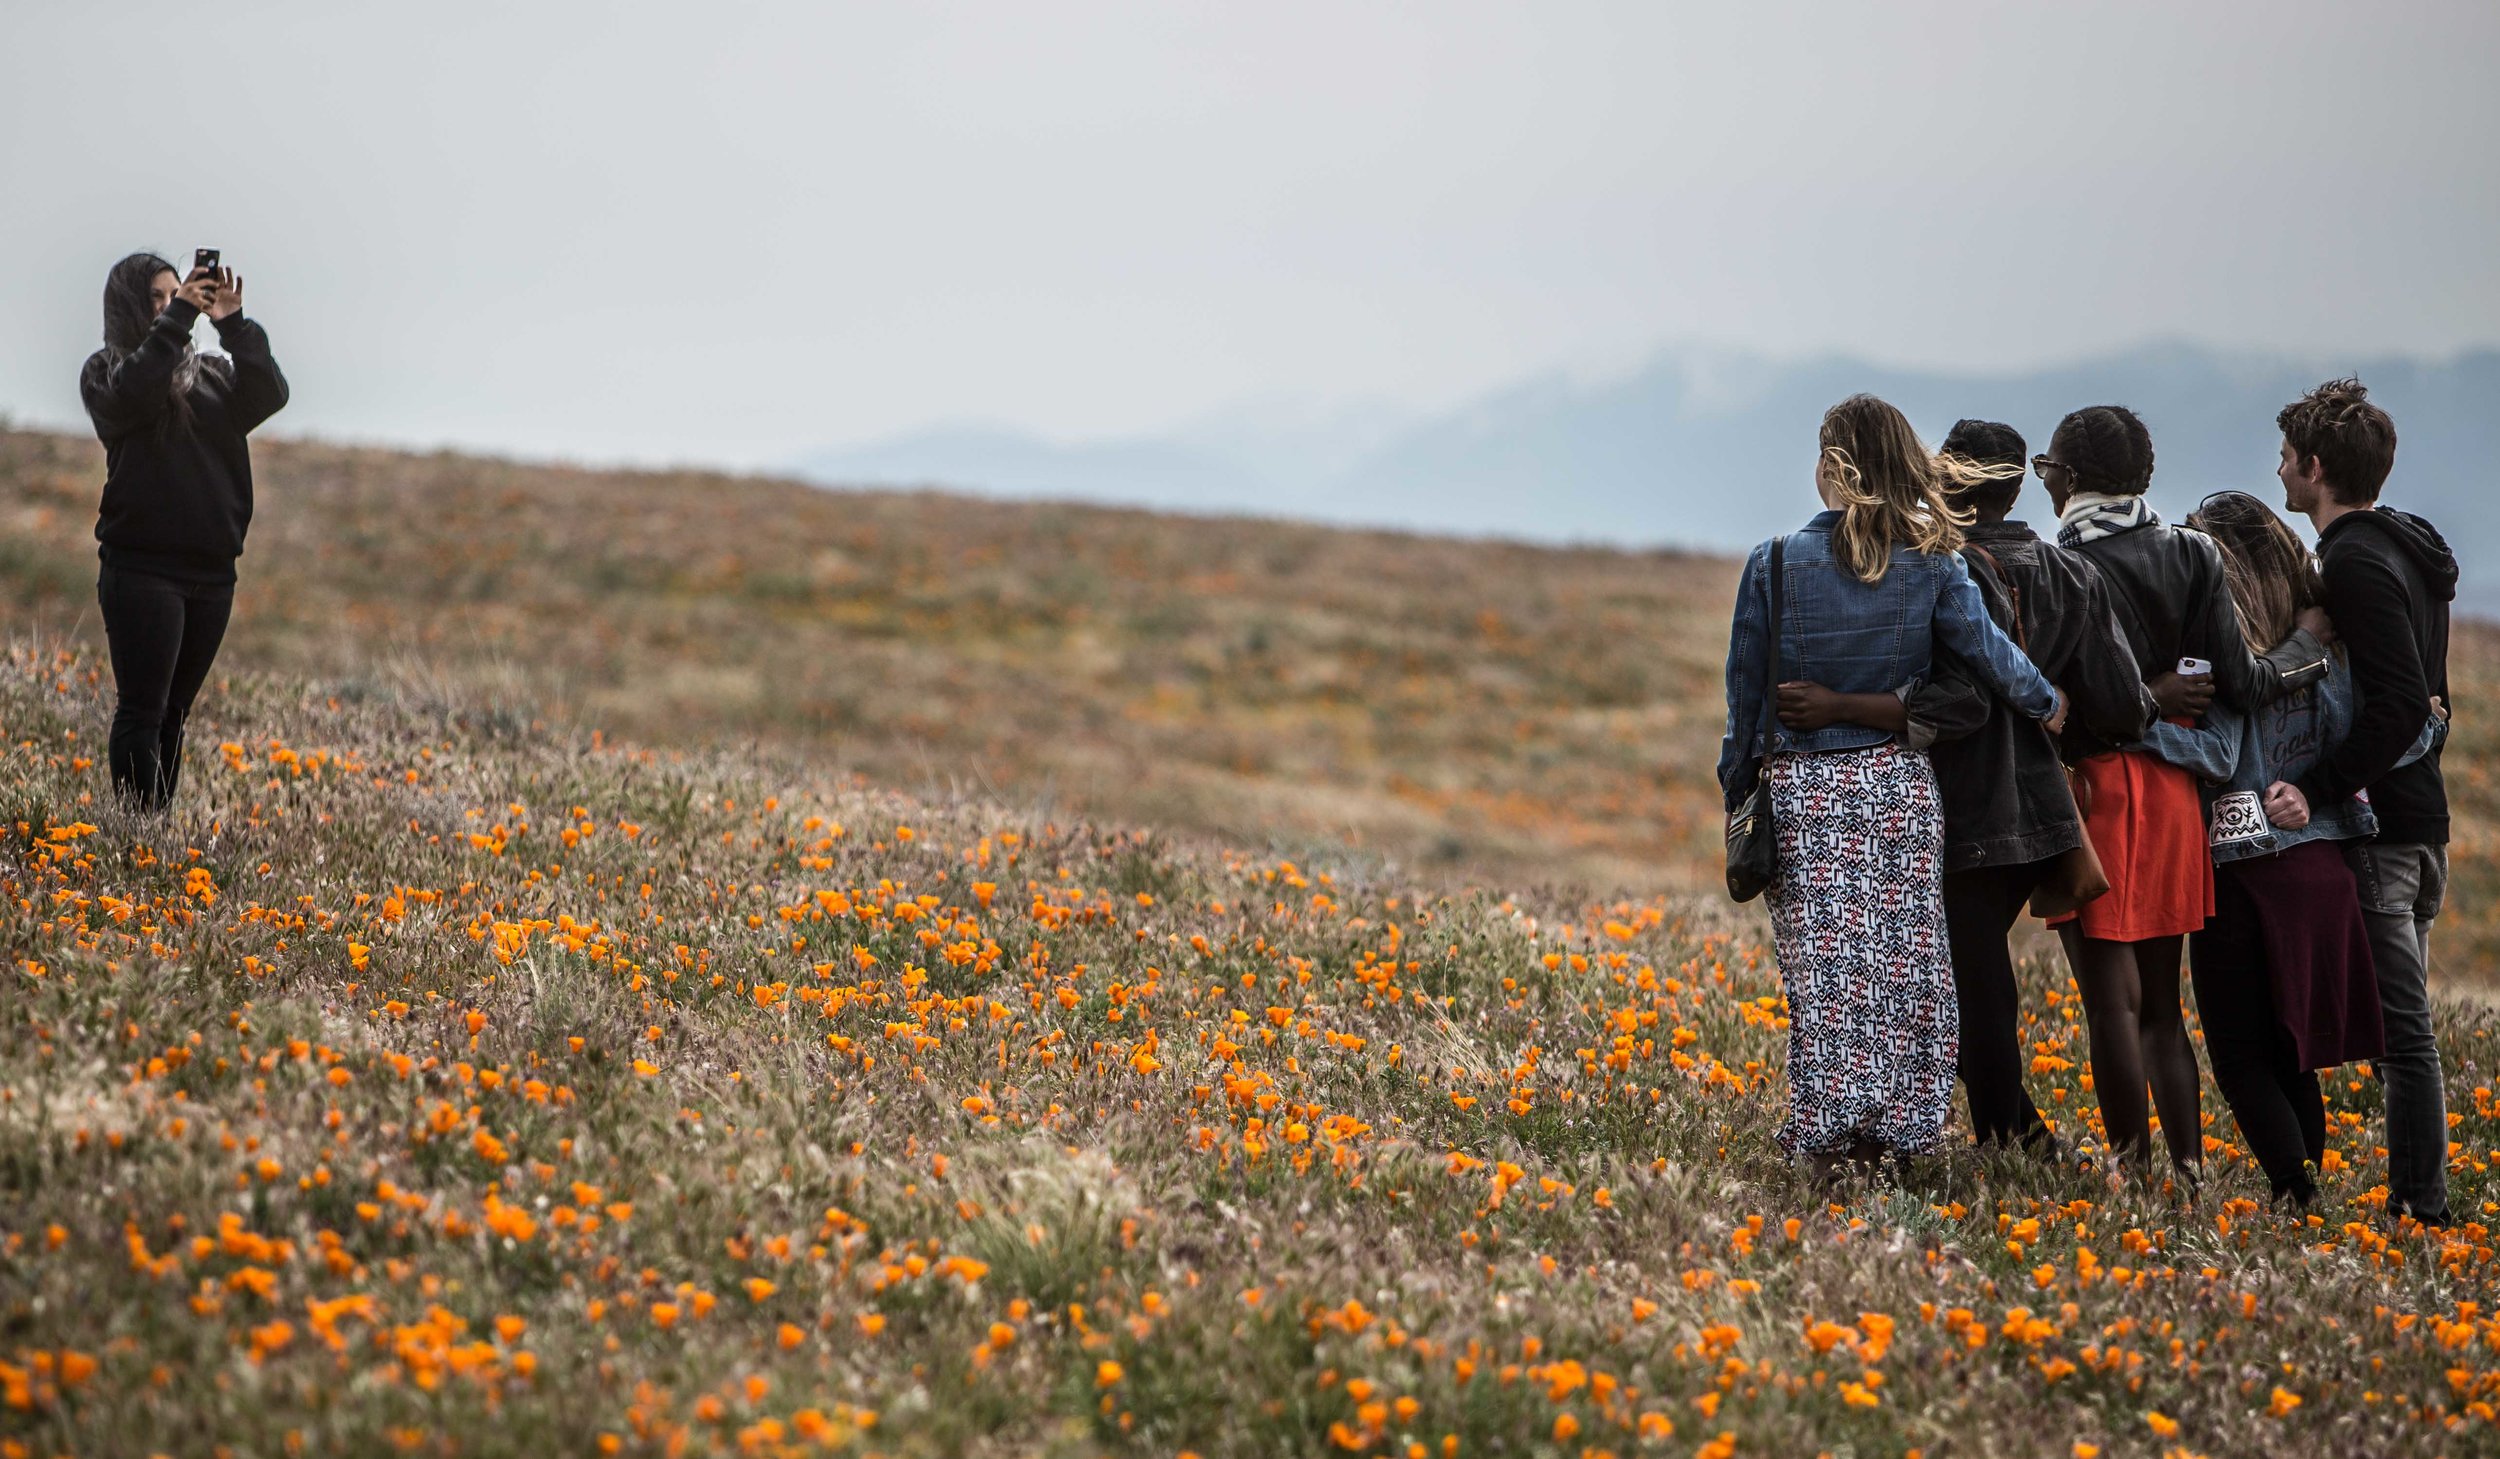  The Poppy bloom in Southern California brought thousands of vistors to the Antelope Valley Poppy Reserve in Antelope Valley California on April 8, 2017. Daniel Bowyer 